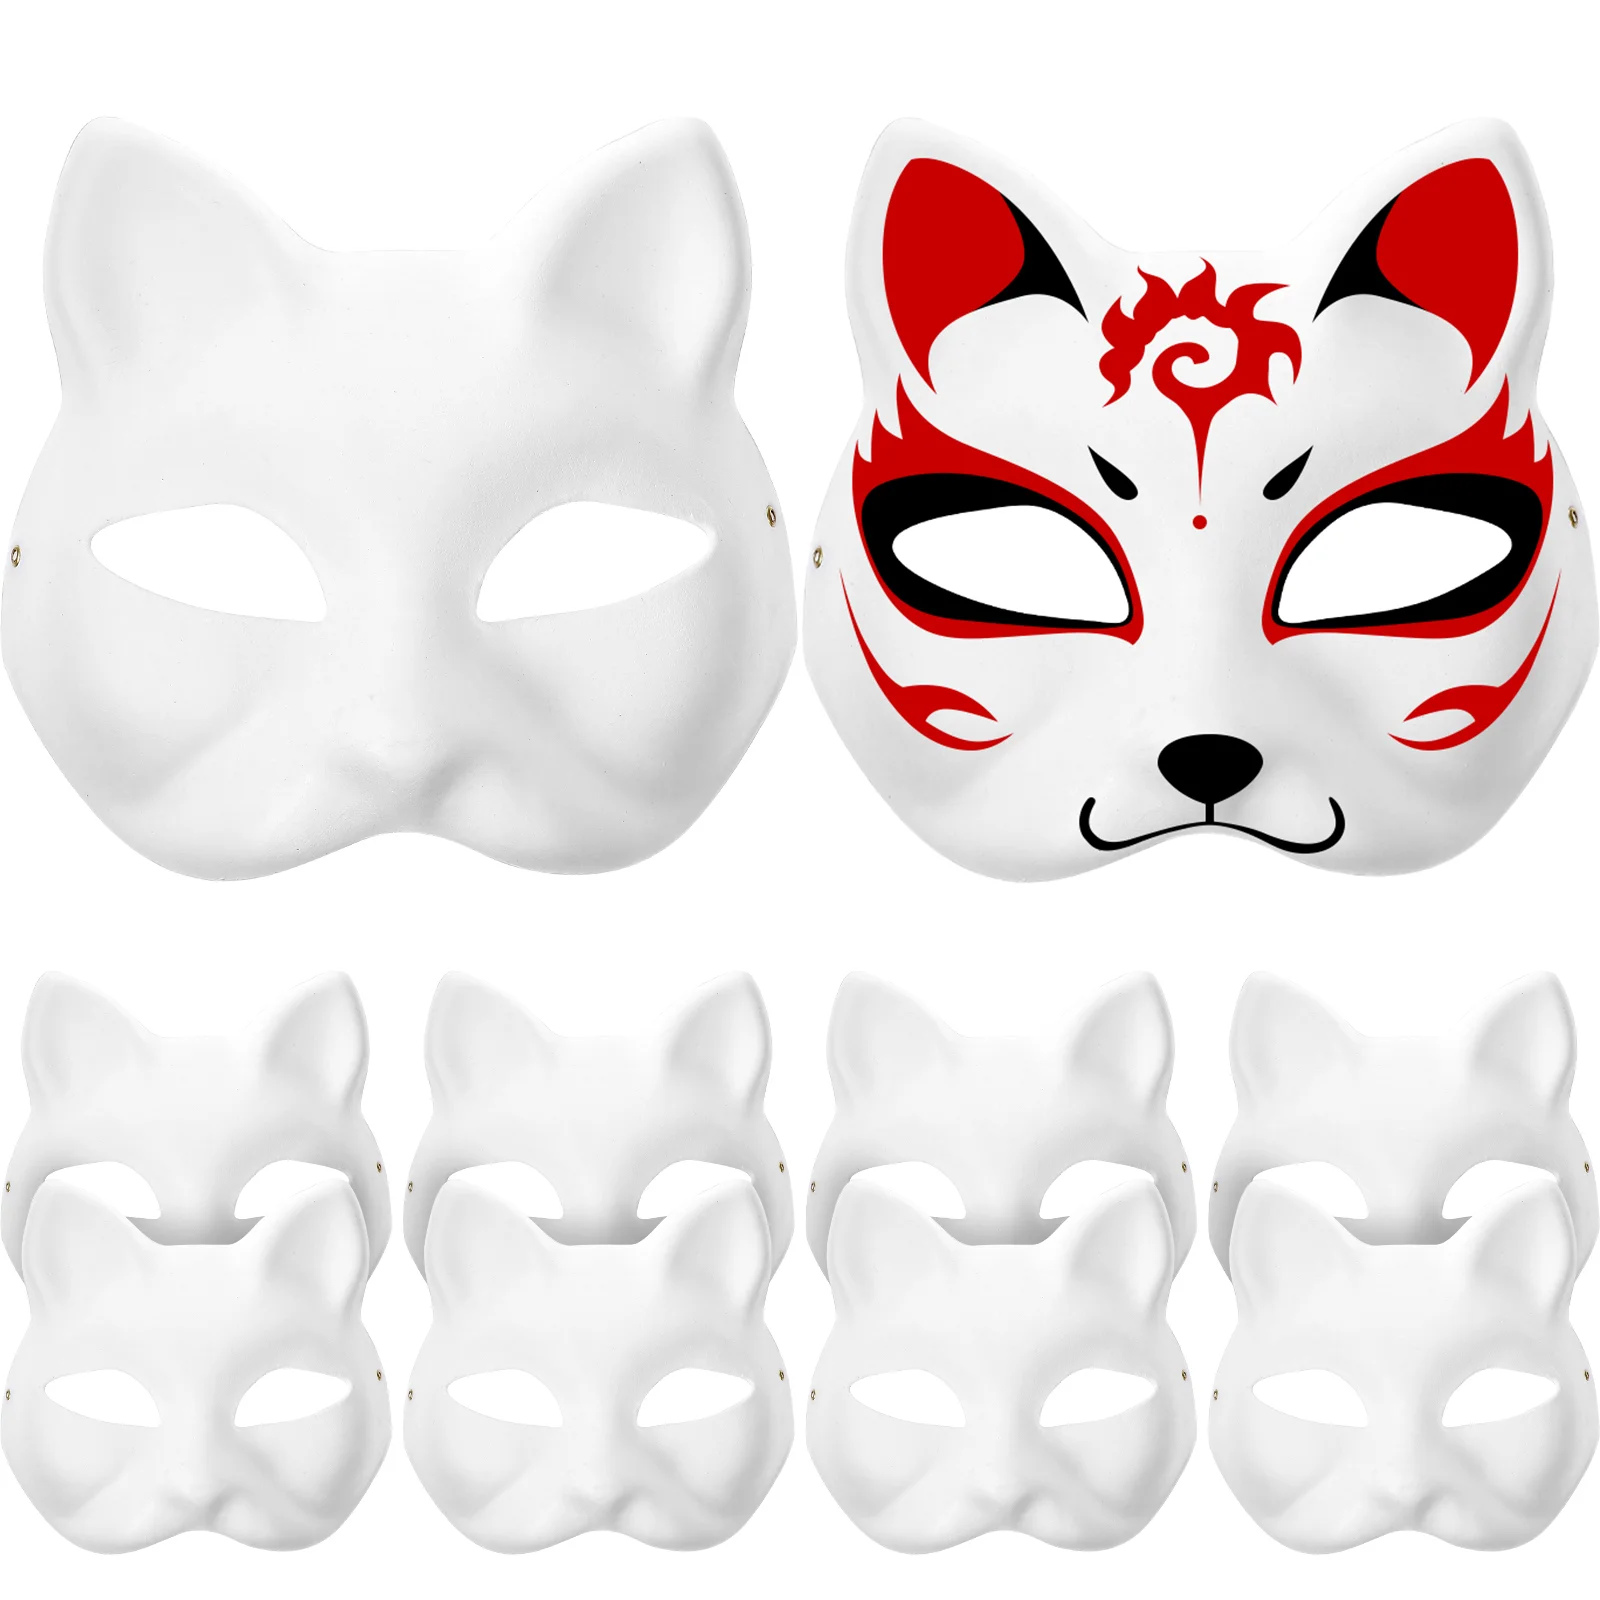 

10 Pcs White Masks Paper Masks Blank Cat Mask for Decorating DIY Painting Masquerade Cosplay Party Mascaras